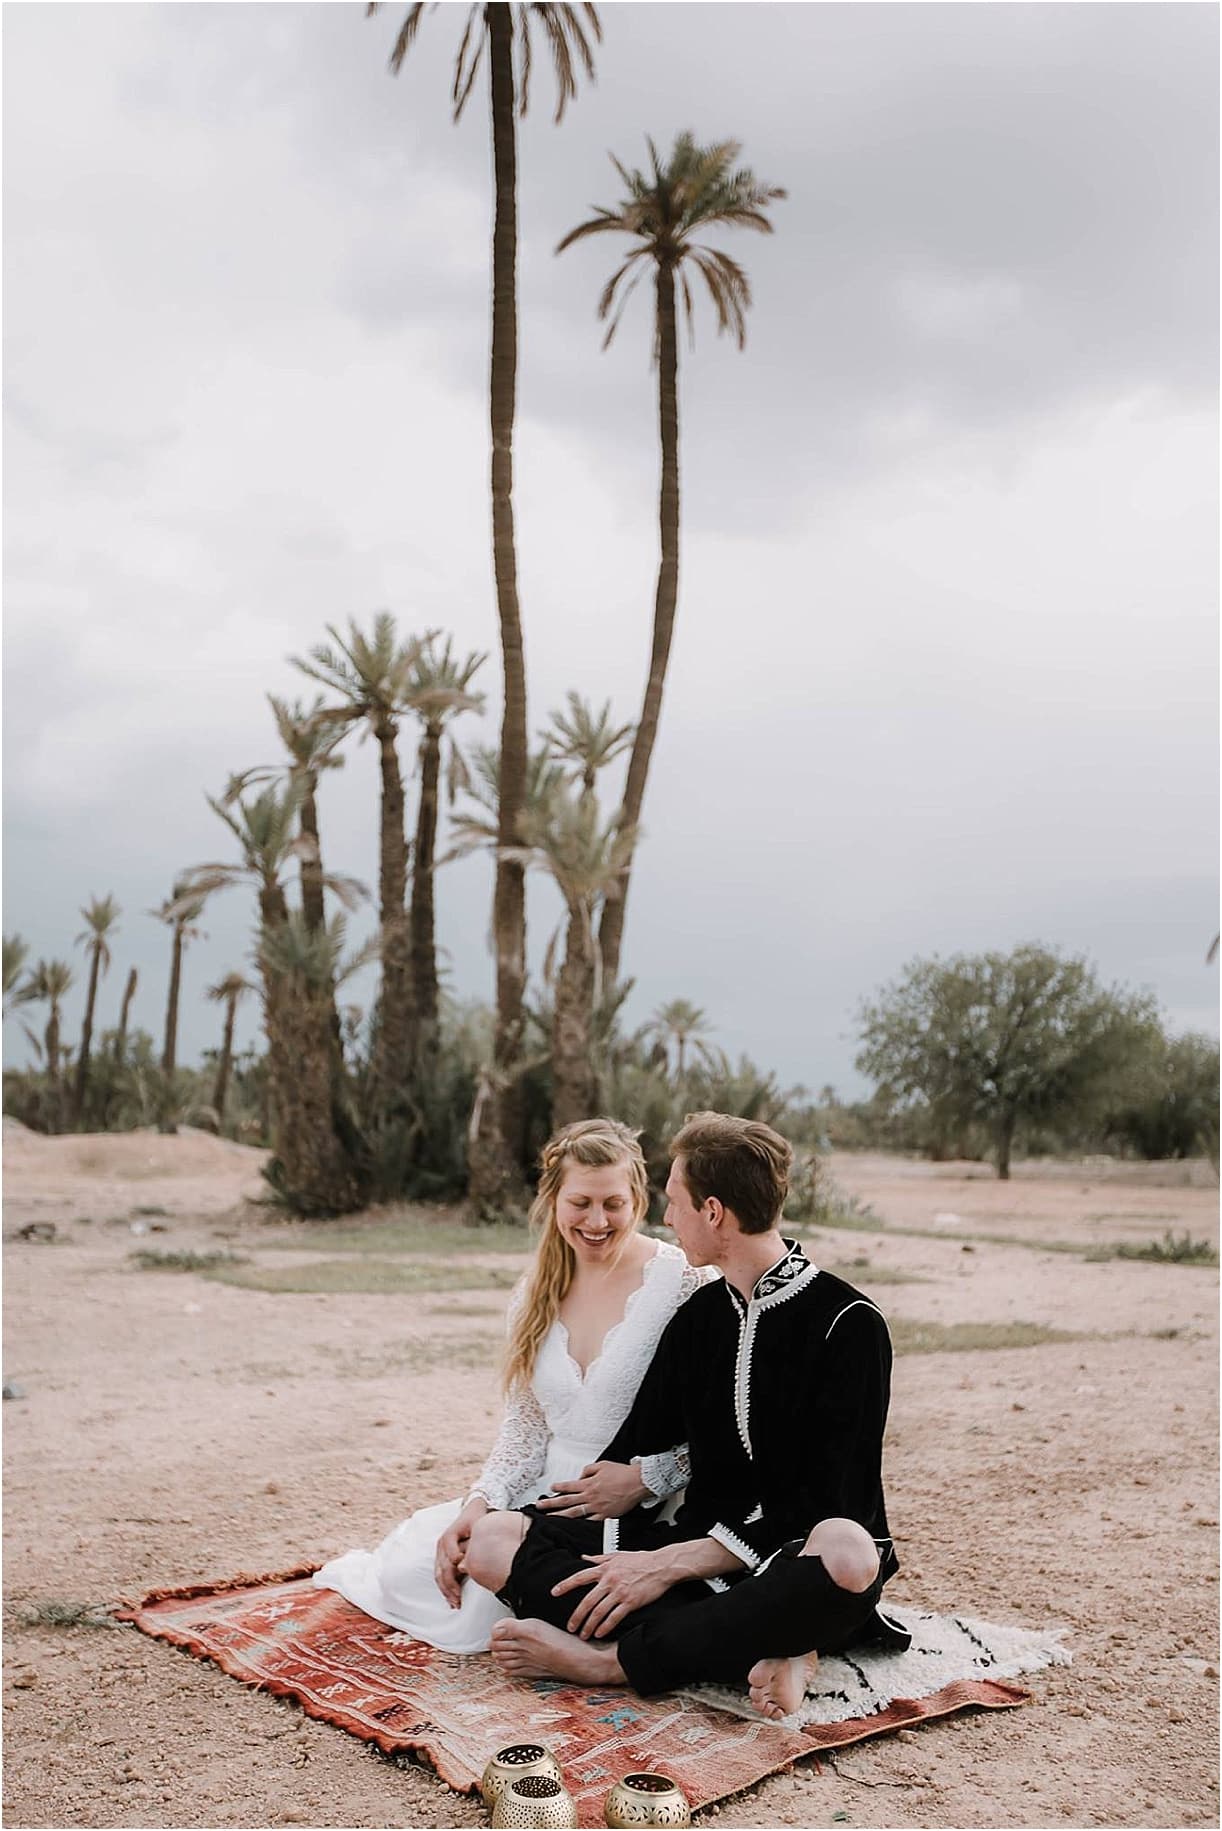 Moroccan Engagement Session in Marrakech, Morocco as seen on Hill City Bride Travel Wedding Blog by Katelyn Victoria E-session Marrakesh